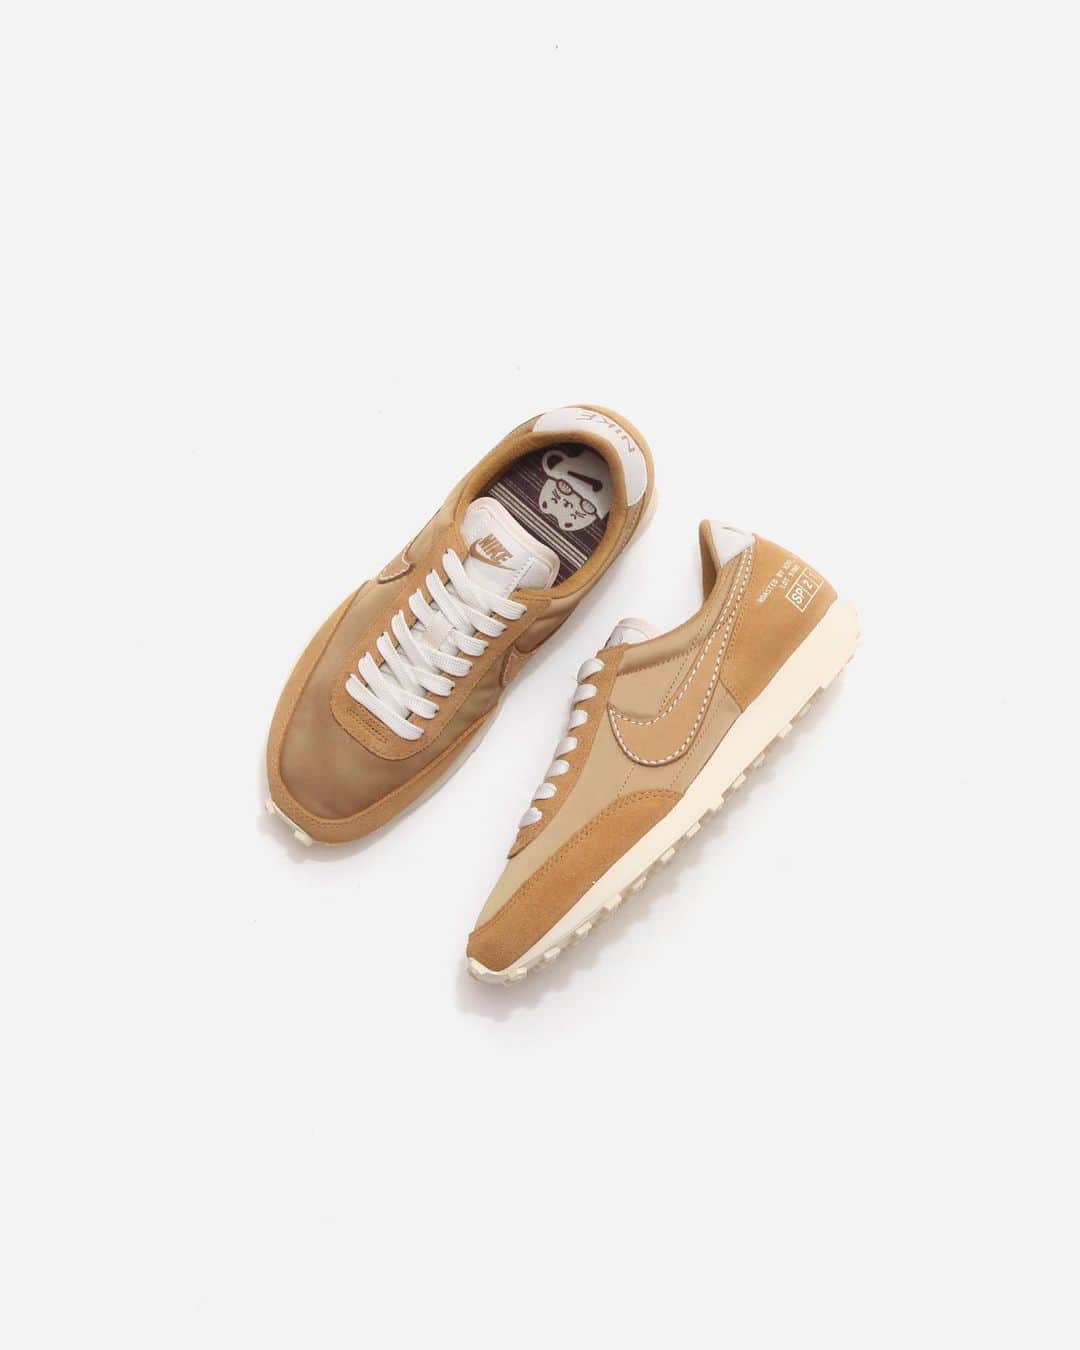 A+Sのインスタグラム：「2021. 2. 1 (mon) in store  ■ NIKE WMNS DBREAK COLOR : WHEAT/PALE IVORY SIZE : 22.0cm - 25.0cm PRICE : ¥12,000 (+TAX)  カフェカルチャーののんびりとした雰囲気からインスピレーションを得て作られたカフェラテパック。モカの様な豊かで落ち着きのあるカラーになります。ワイズもすっきりと大人な雰囲気がありボトムスを選ばない優れた一足です。  A cafe latte pack inspired by the laid-back atmosphere of cafe culture. It will be a rich and calm color like mocha. Wise is also a neat and mature atmosphere, and it is an excellent pair that does not choose bottoms.  #a_and_s #NIKE #NIKEDBREAK #NIKEWMNSDBREAK #NIKECAFFELATTEPACK」